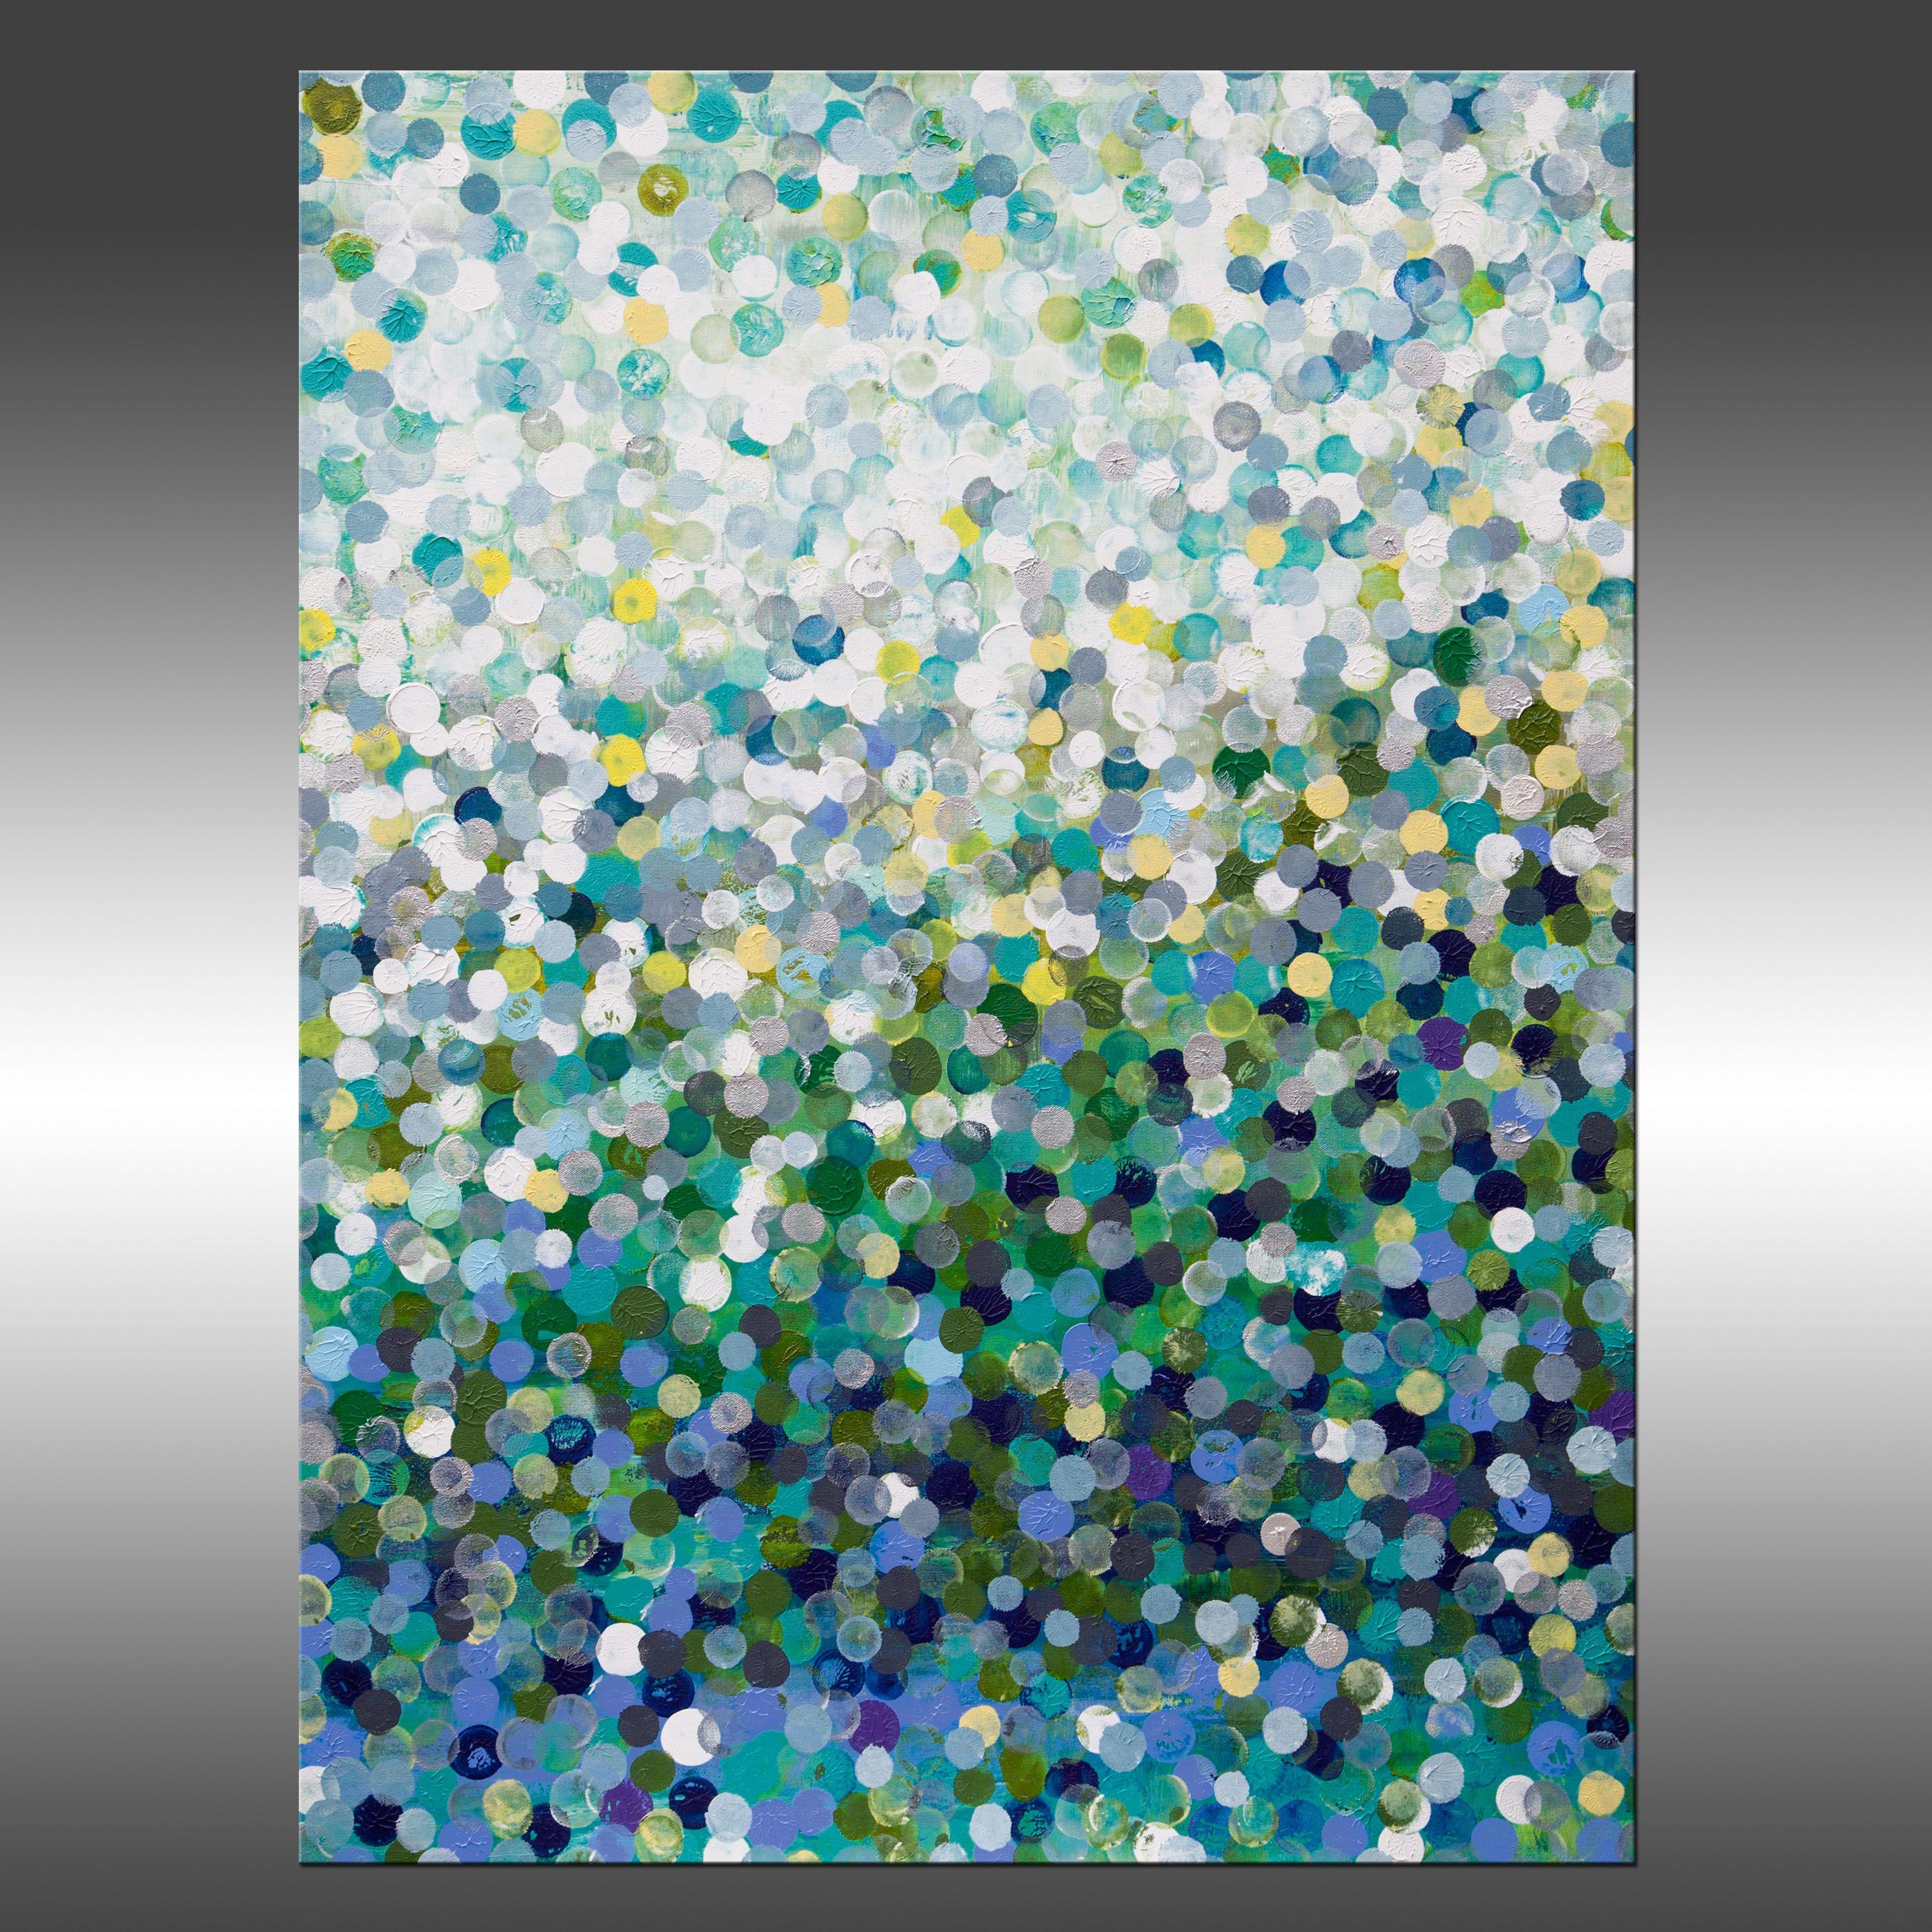 Infinity 1 is an original painting, created with acrylic paint on gallery-wrapped canvas. It has a width of 30 inches and a height of 40 inches with a depth of 1.5 inches (30x40x1.5).    The colors used in the painting are white, teal, green,